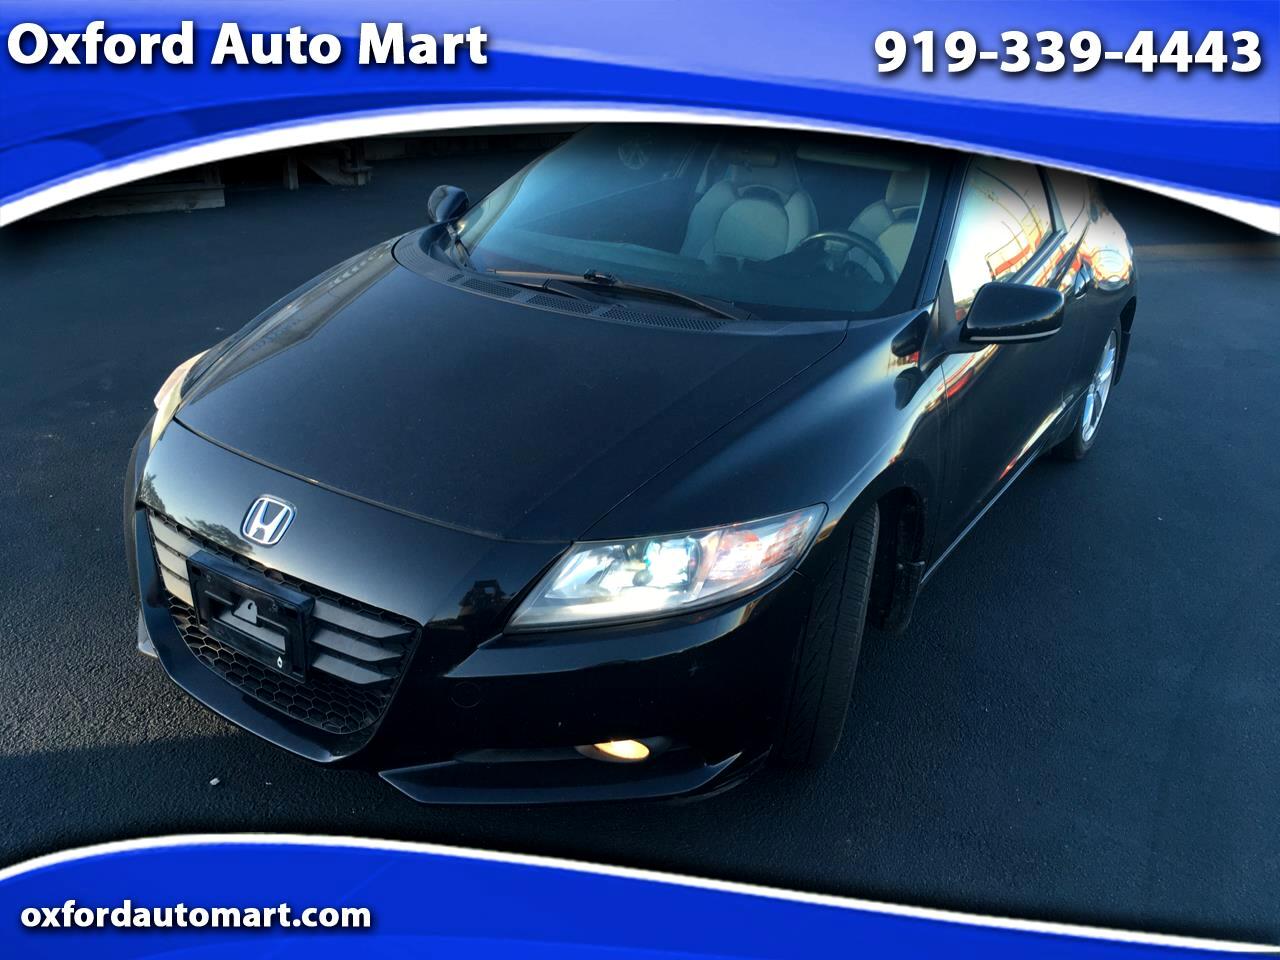 Used 2011 Honda Cr Z Ex 6m For Sale In Oxford Nc 27565